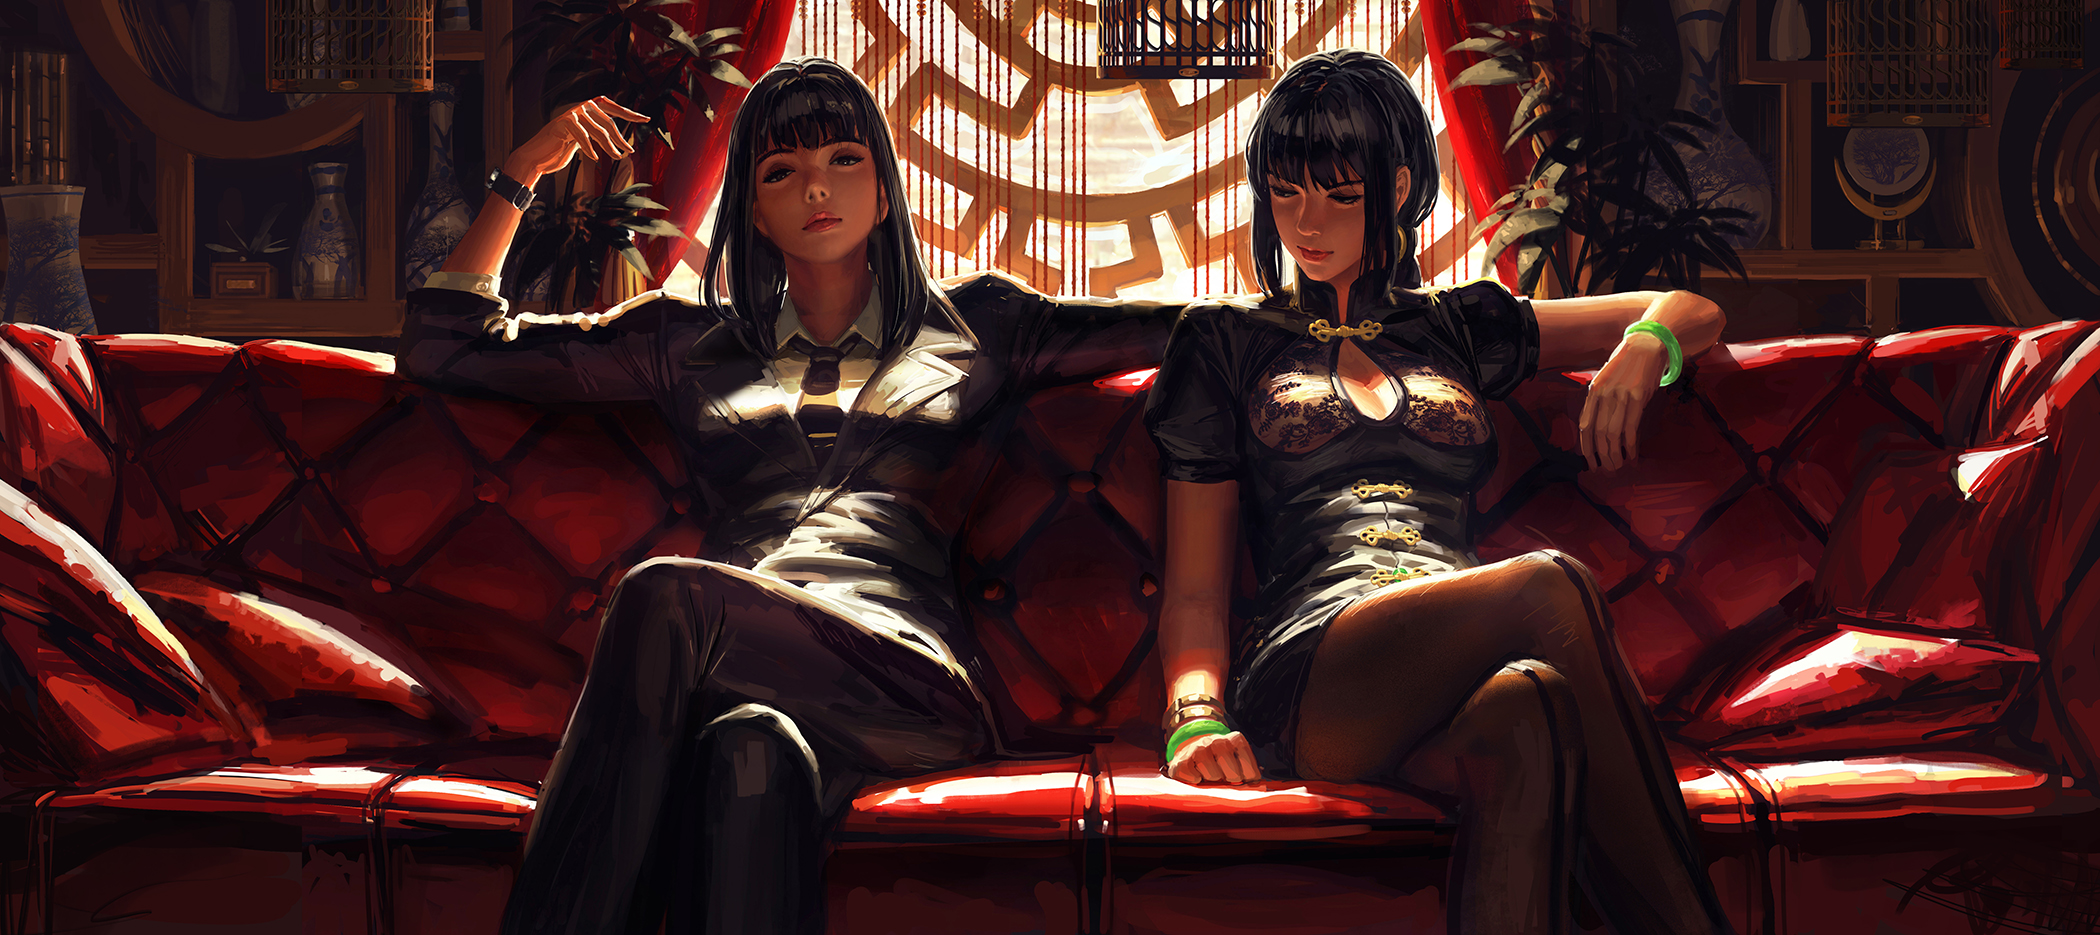 Ultrawide Couch Suits GUWEiZ 2100x935